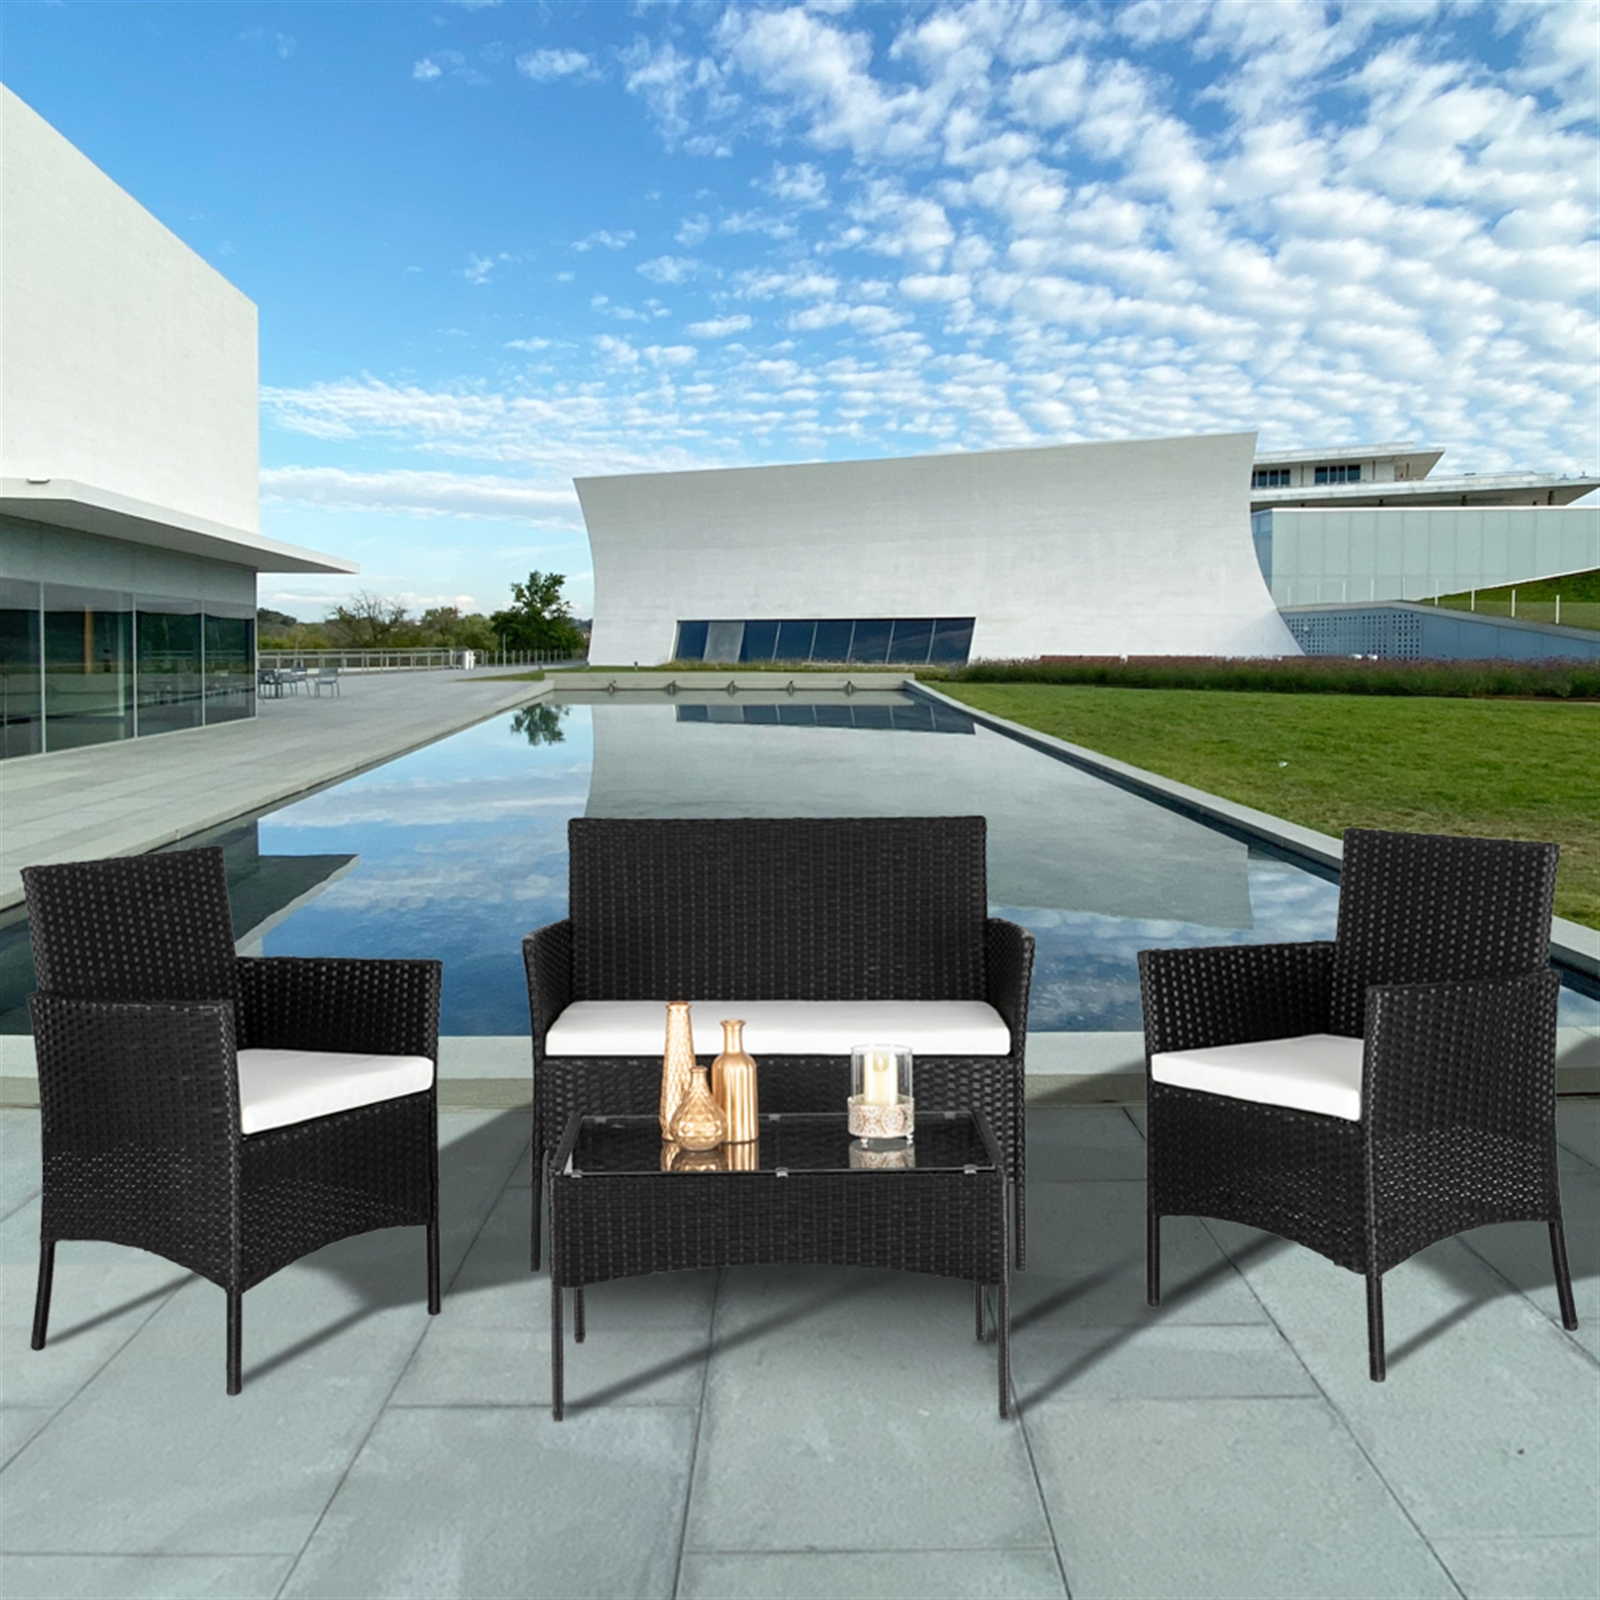 Outdoor Patio Set, iRerts Modern 4 Pieces Front Porch Furniture Sets, Rattan Wicker Patio Furniture Set with Beige Cushion, Table, Patio Conversation Set for Backyard Garden Poolside, Black, R2942 - image 1 of 8